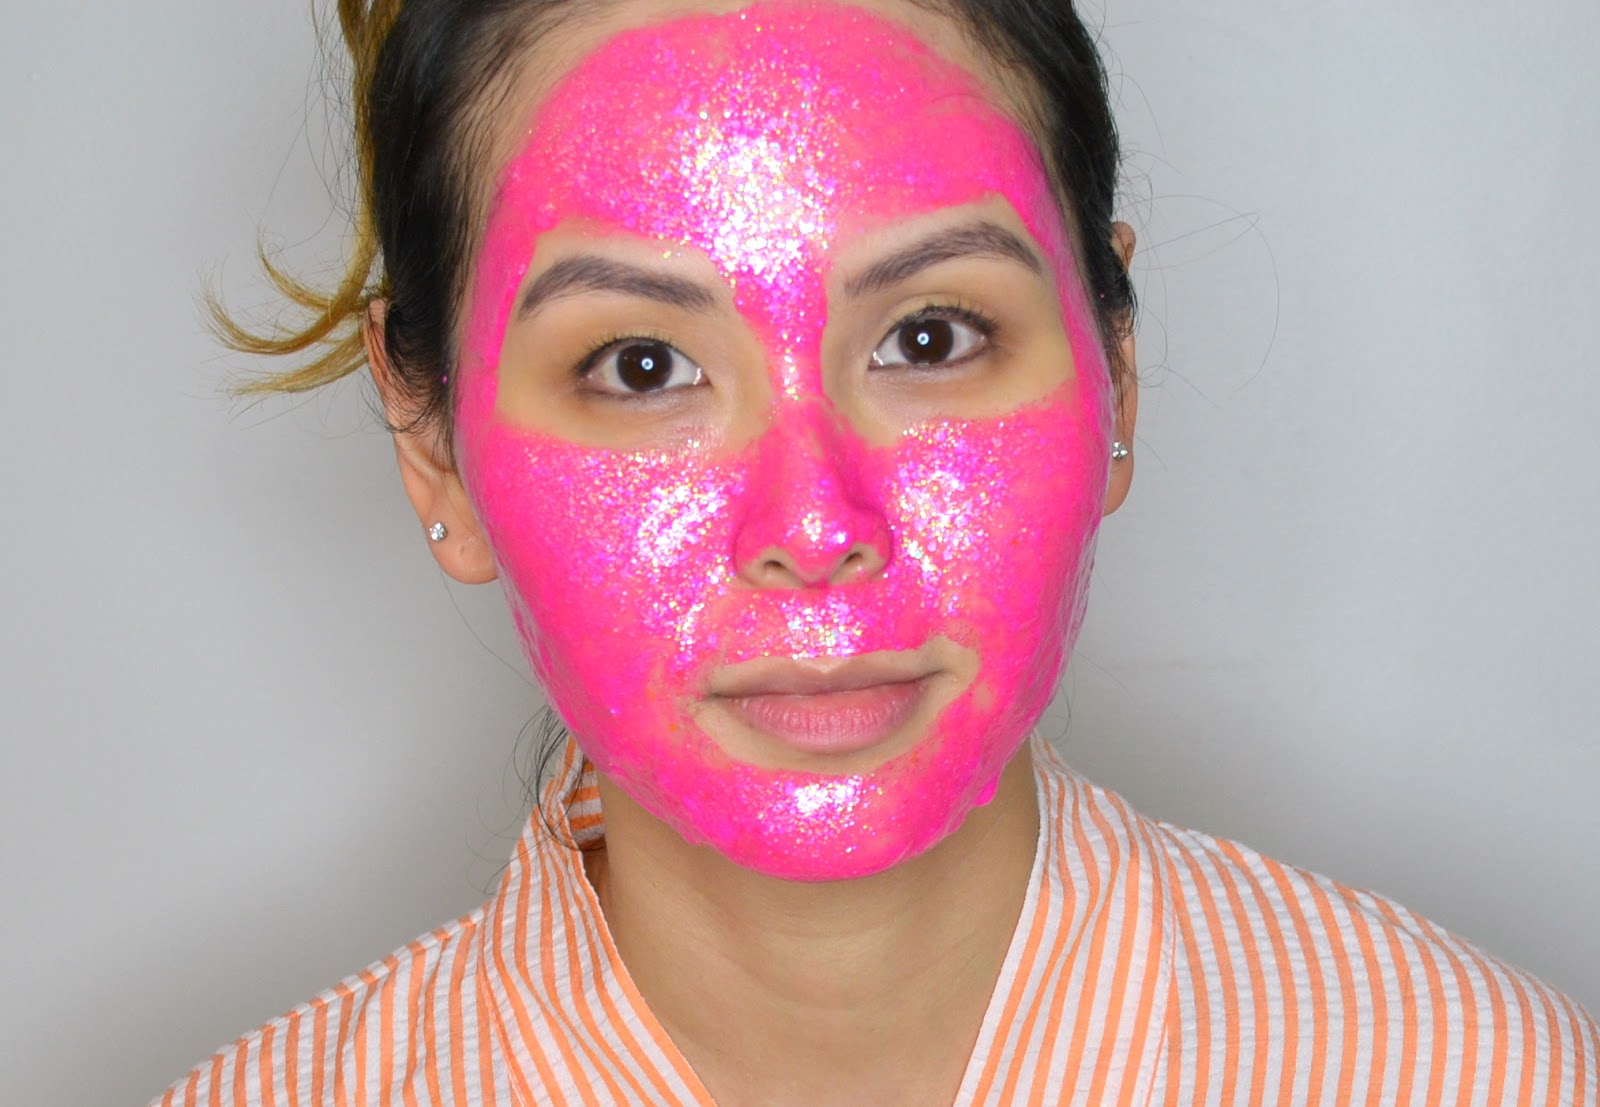 SKINCARE | My Little Pony (Pink) #Glittermask Firming Treatment Cosmetic Proof Vancouver beauty, nail art and lifestyle blog